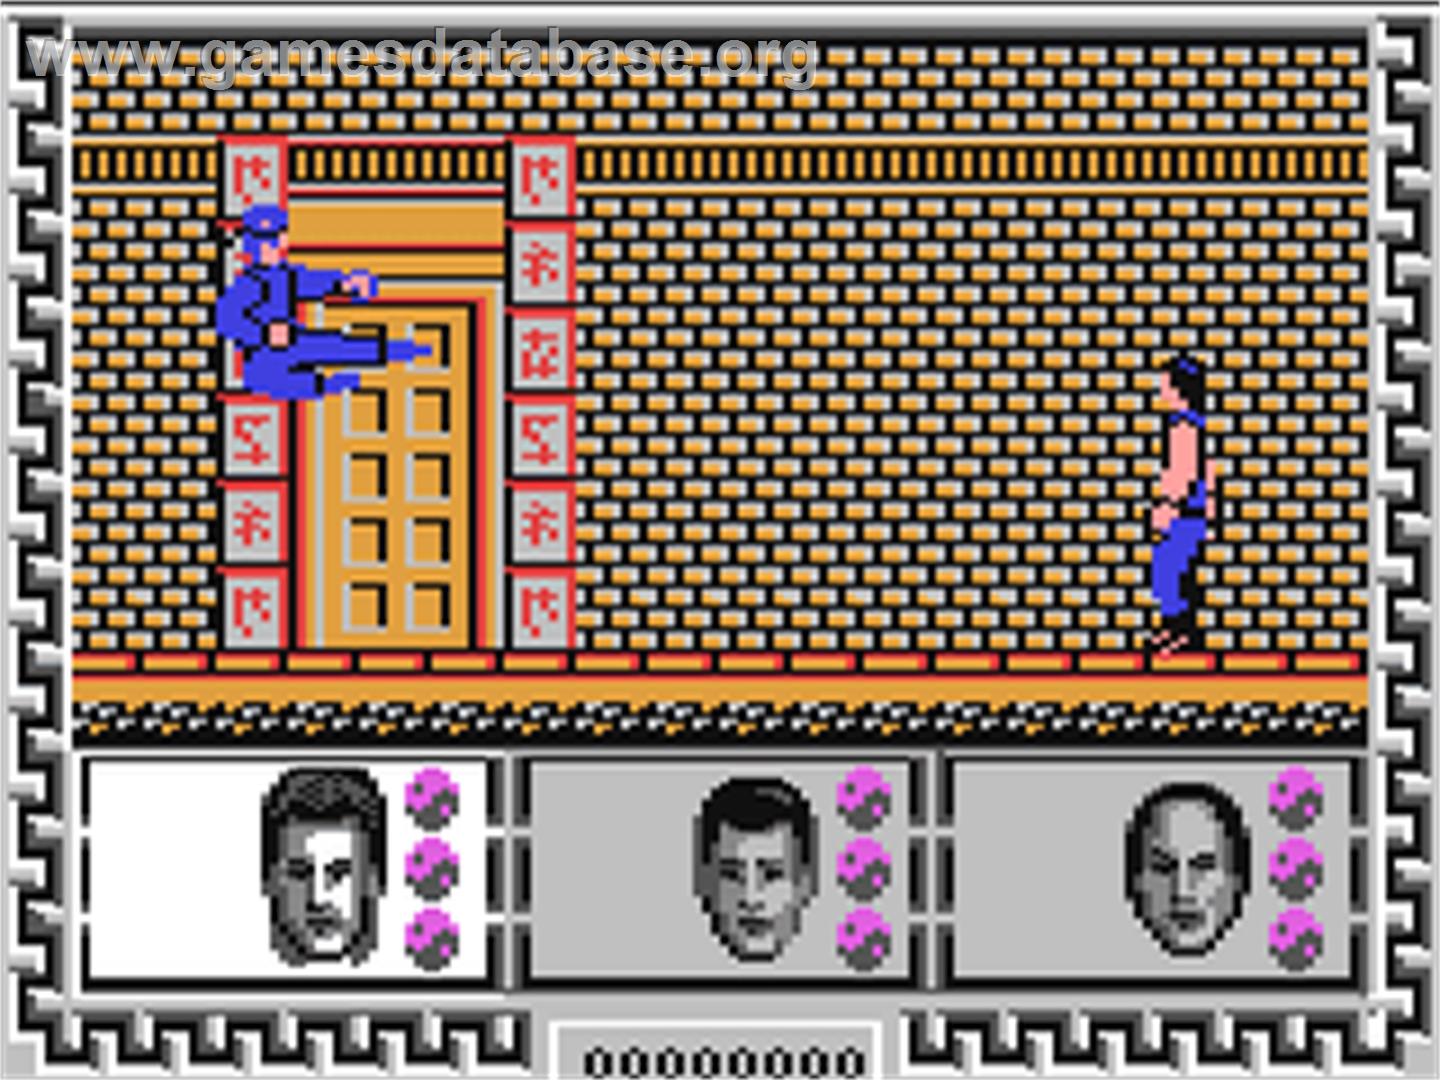 Big Trouble in Little China - Commodore 64 - Artwork - In Game